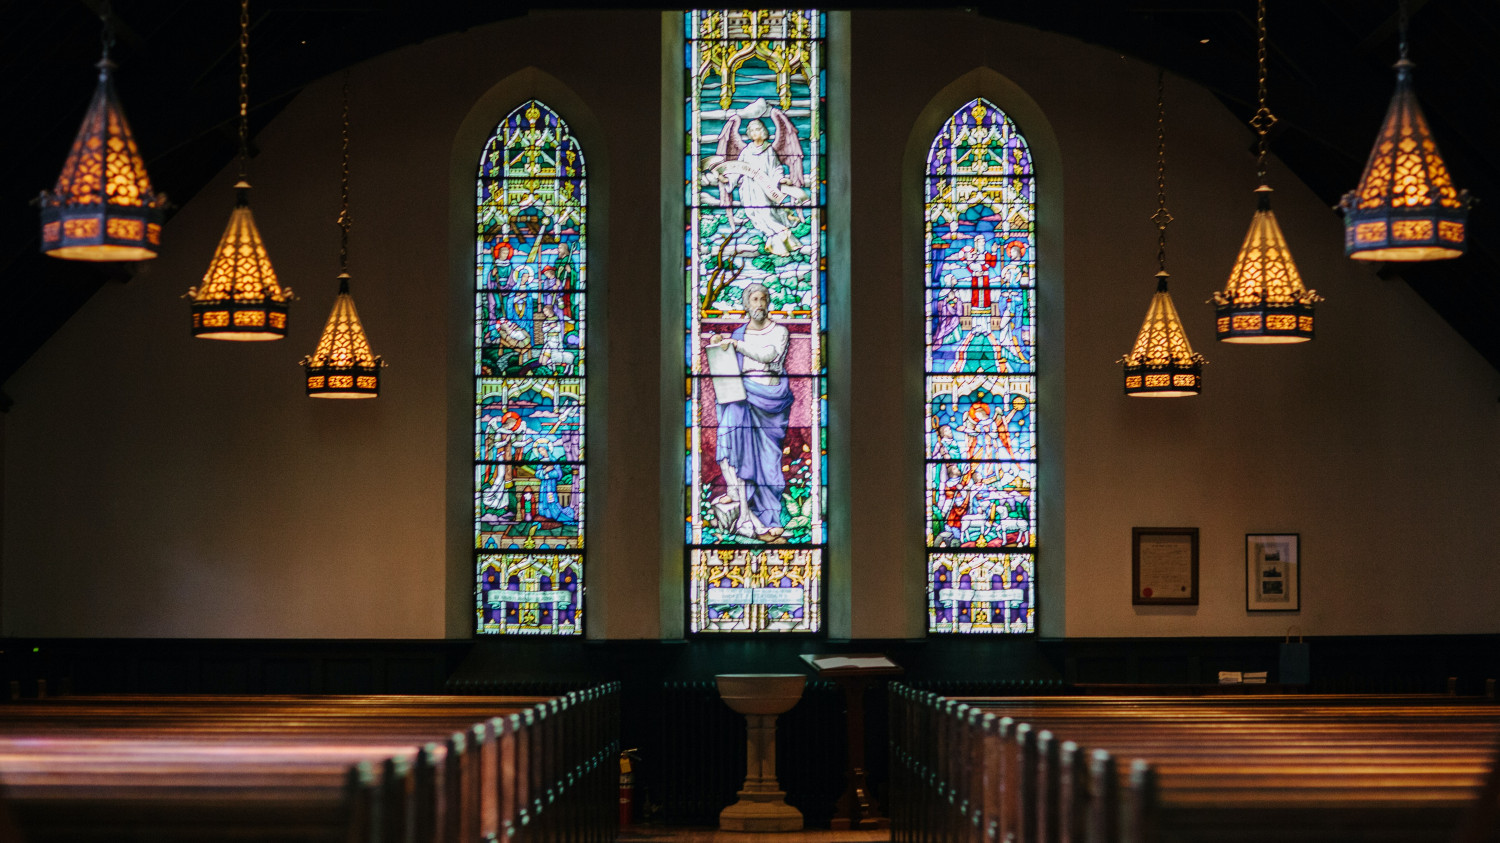 Image of stained glass windows within a church